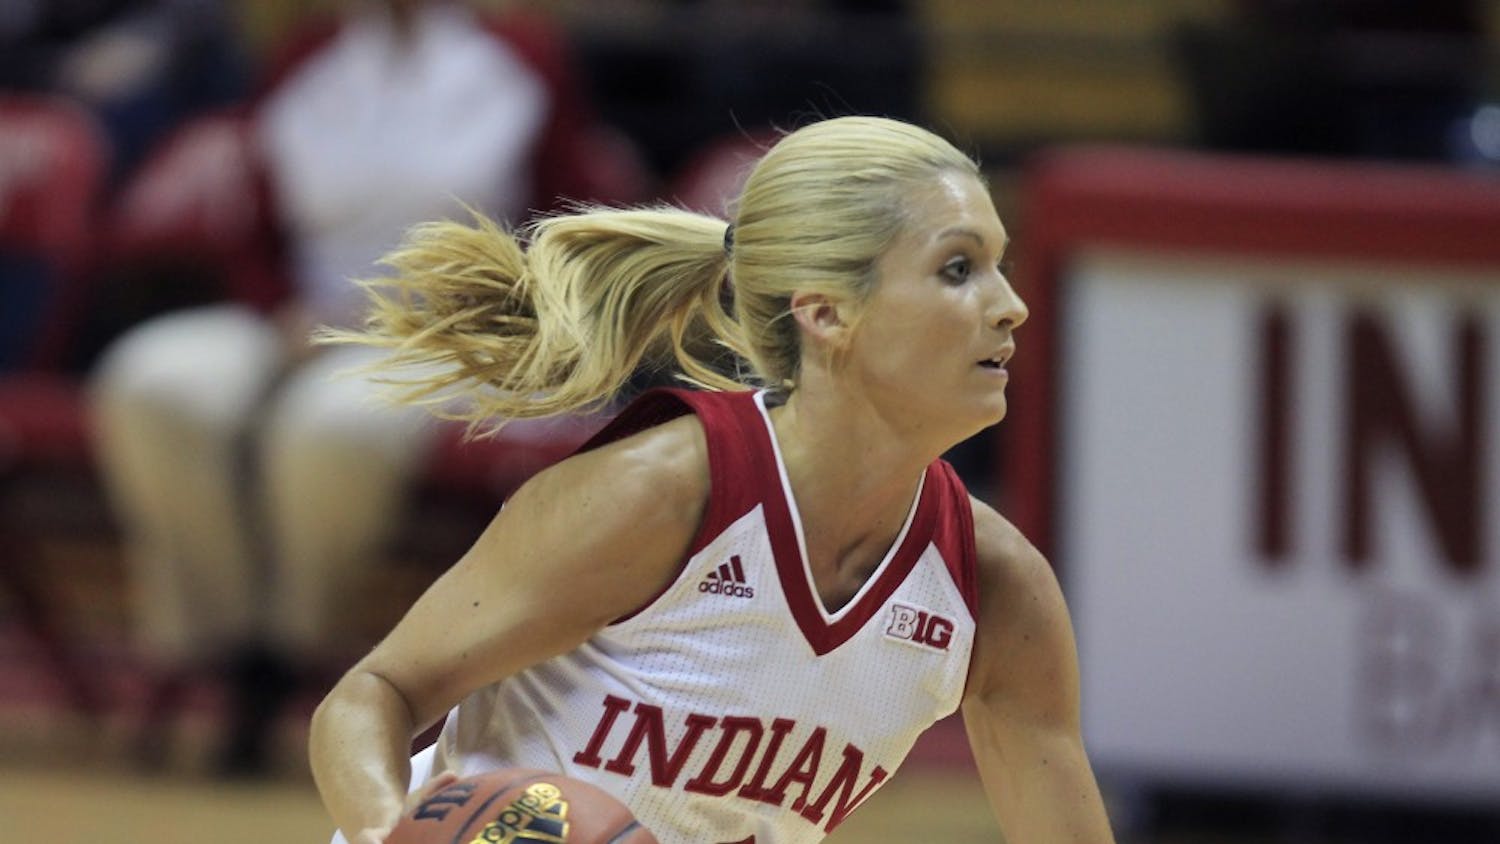 Senior guard Tyra Buss looks for an opportunity to score or pass the ball to a teammate during the game against Southern University. By halftime, IU was up 36-32. The game was Tuesday at Simon Skjodt Assembly Hall.